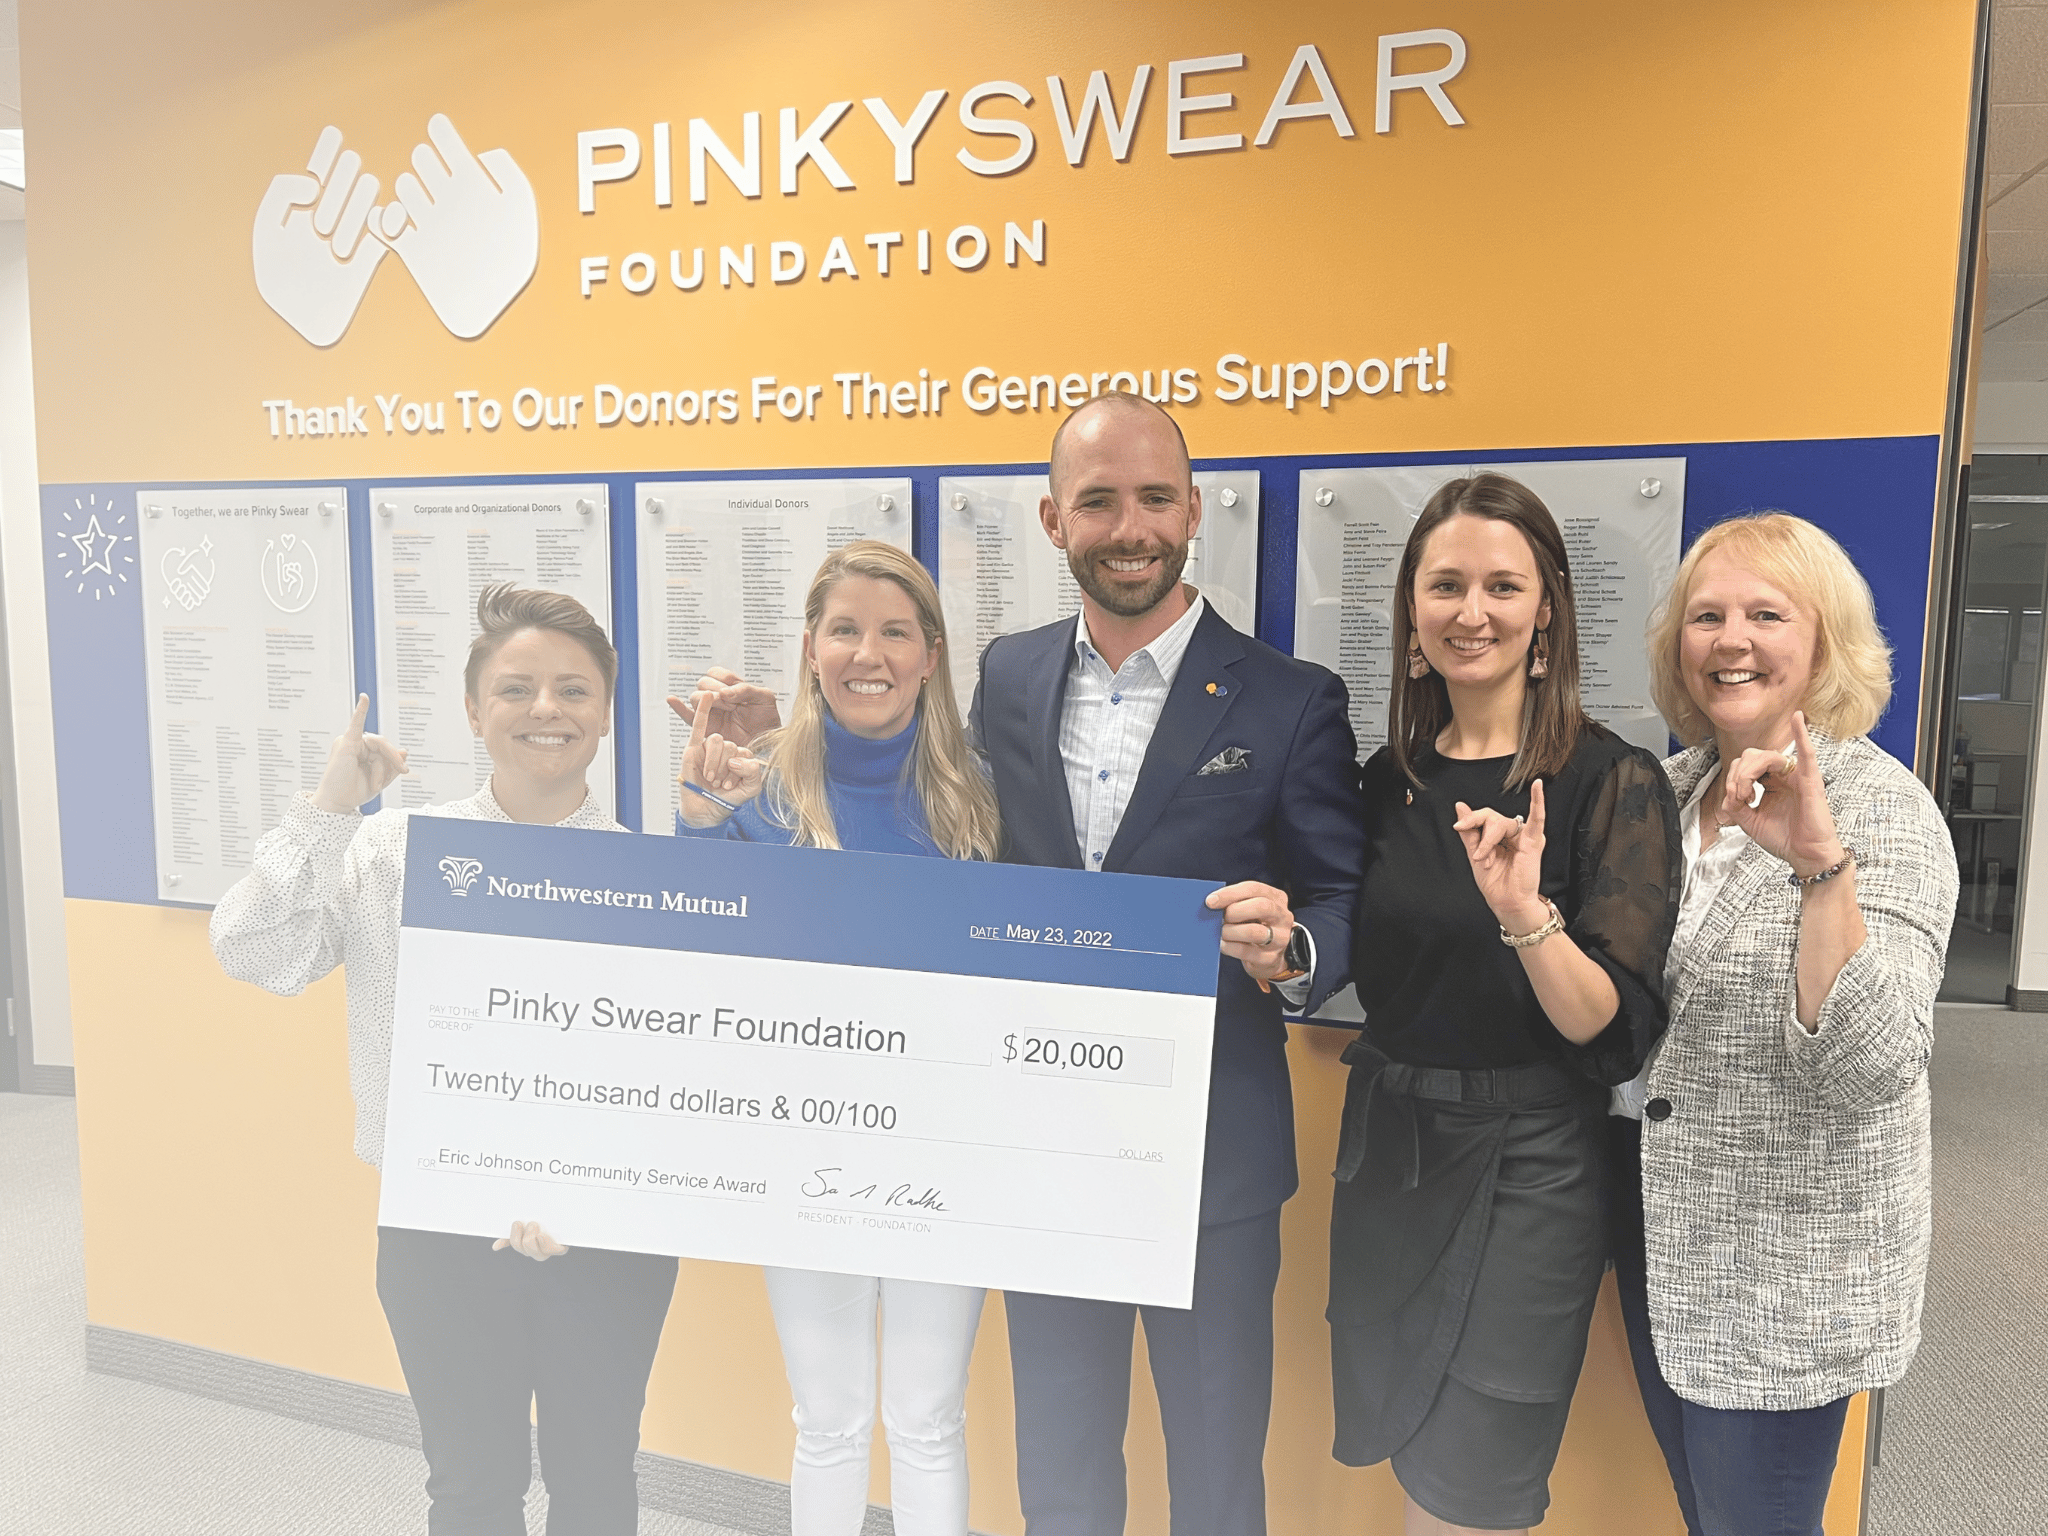 Northwestern Mutual presenting a check to support kids with cancer to Pinky Swear Foundation.